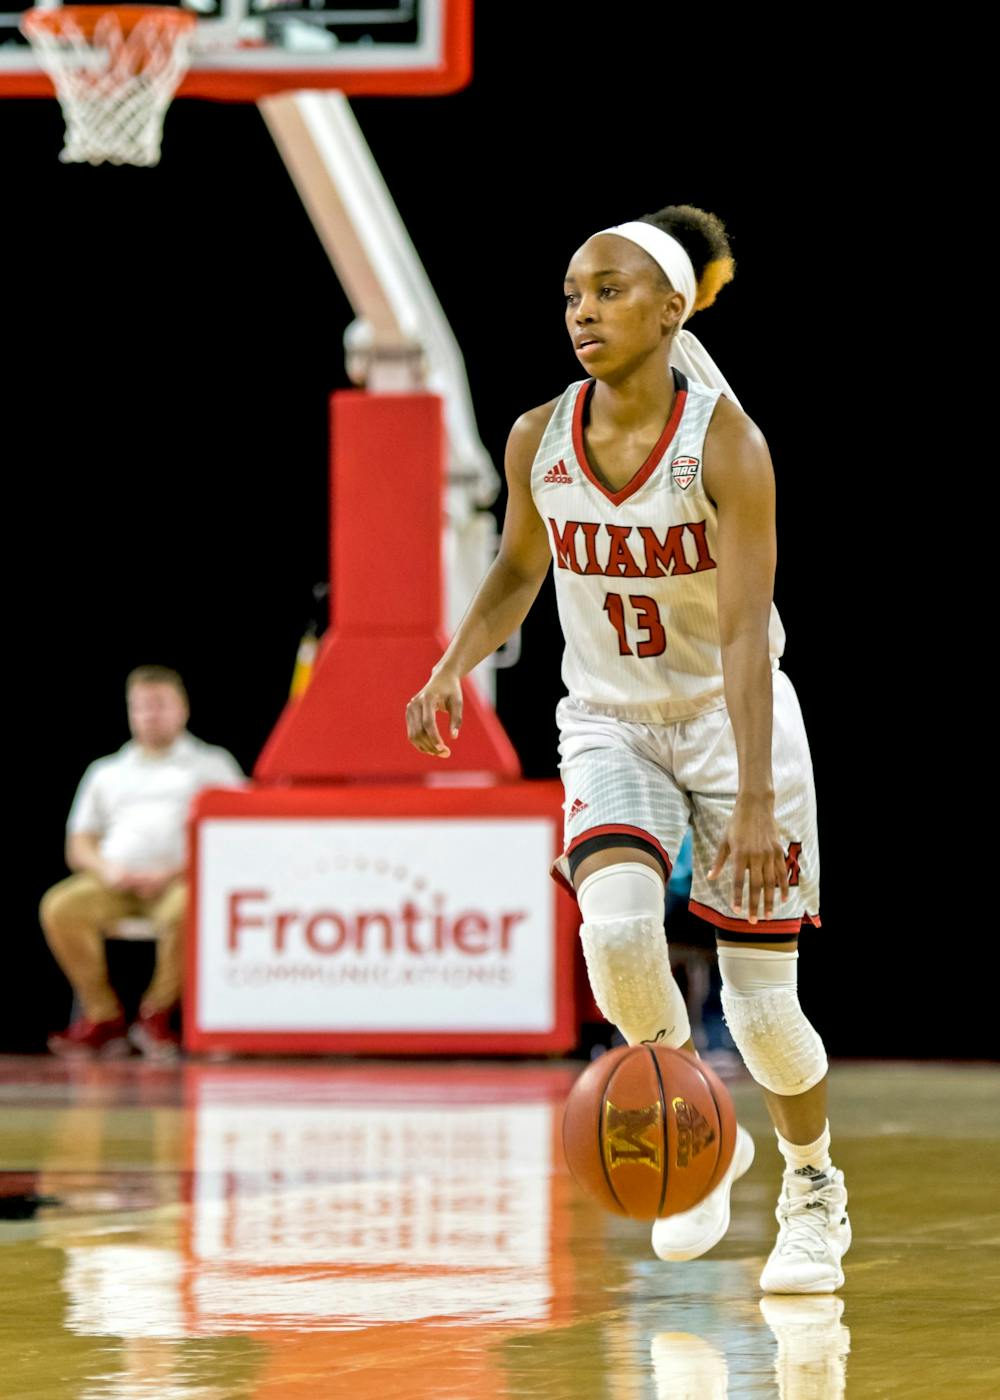 Lauren Dickerson will start Wednesday, March 4, against Bowling Green. If she scores 14 points, she breaks Miami&#x27;s all-time scoring record.